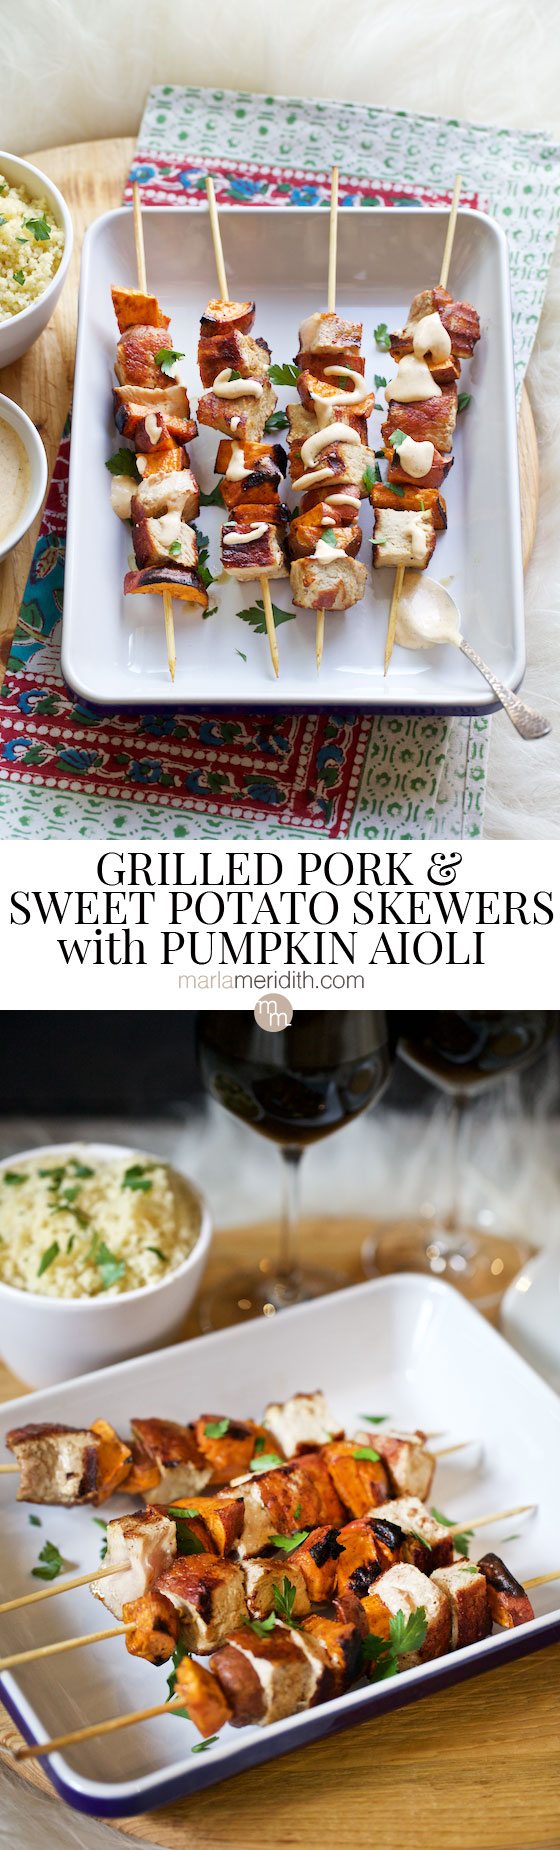 Grilled Pork & Sweet Potato Skewers with Pumpkin Aioli recipe. Exciting alternative to turkey for the holidays. MarlaMeridith.com ( @marlameridith ) #MakeItAMoment @porkbeinspired